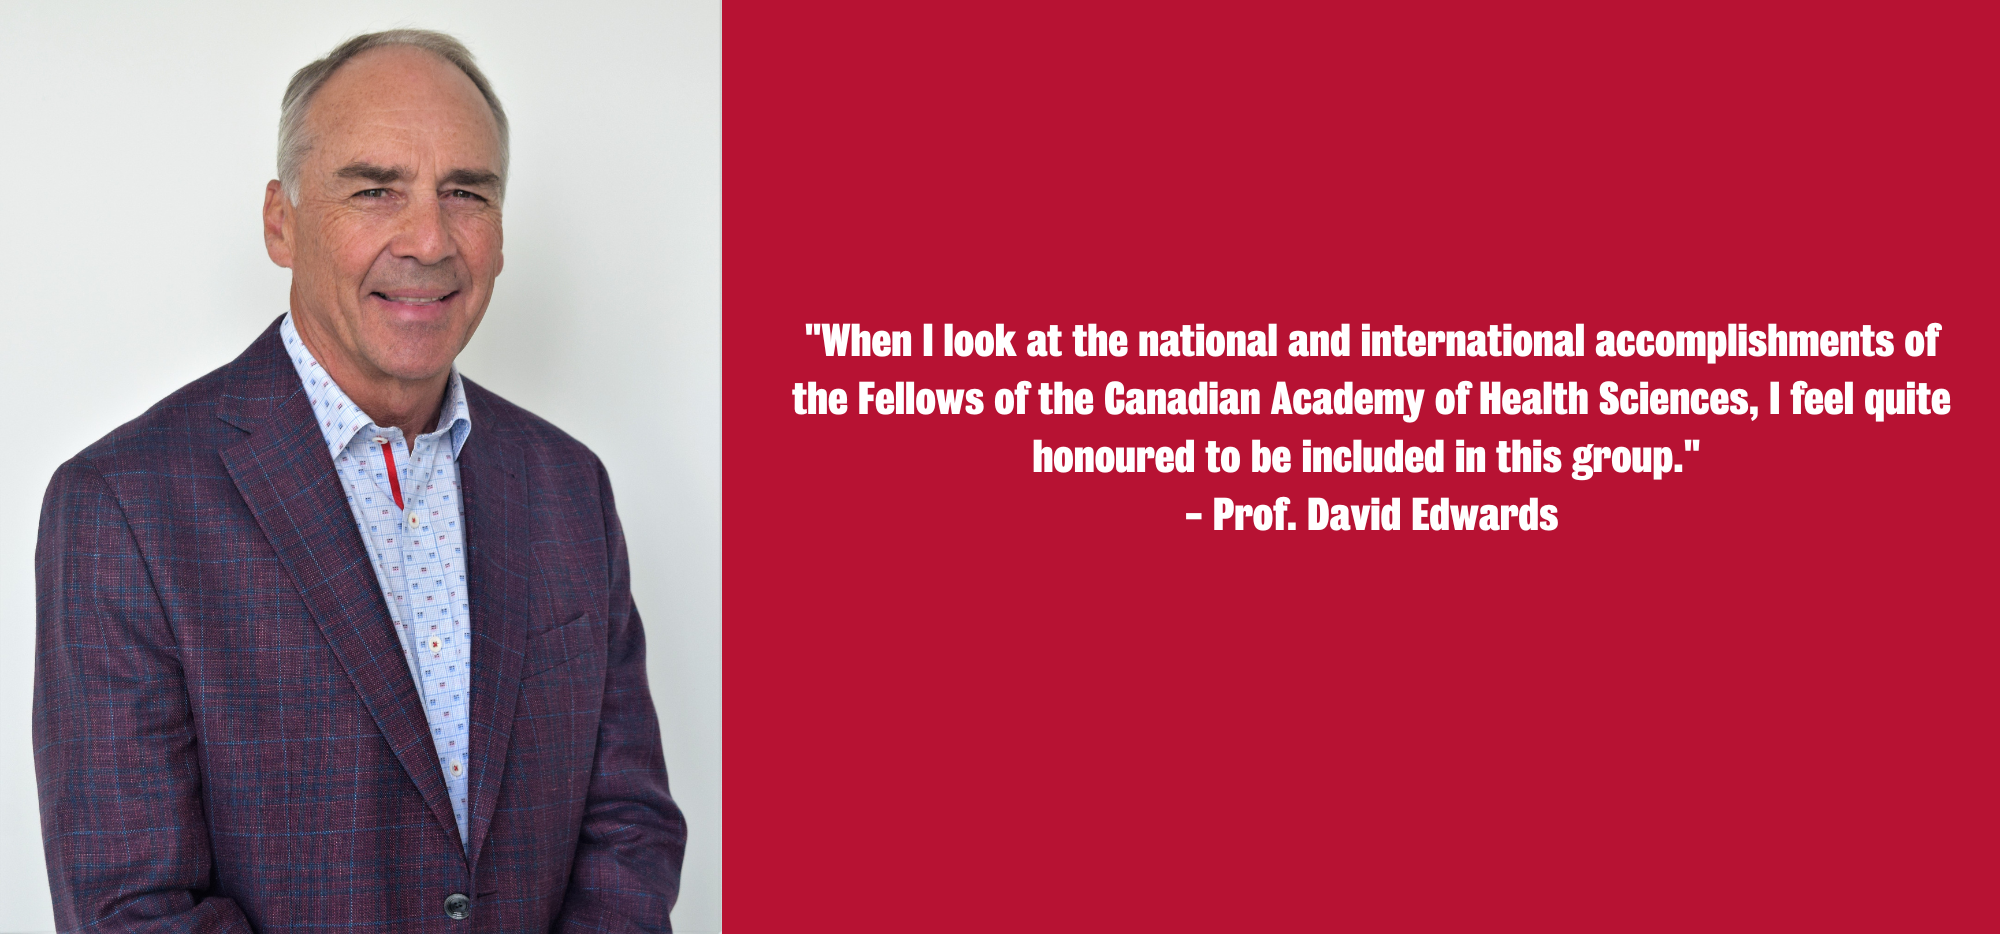 David Edwards, "When I look at the national and international accomplishments of the Fellows of the Canadian Academy of Health Sciences, I feel quite honoured to be included in this group."